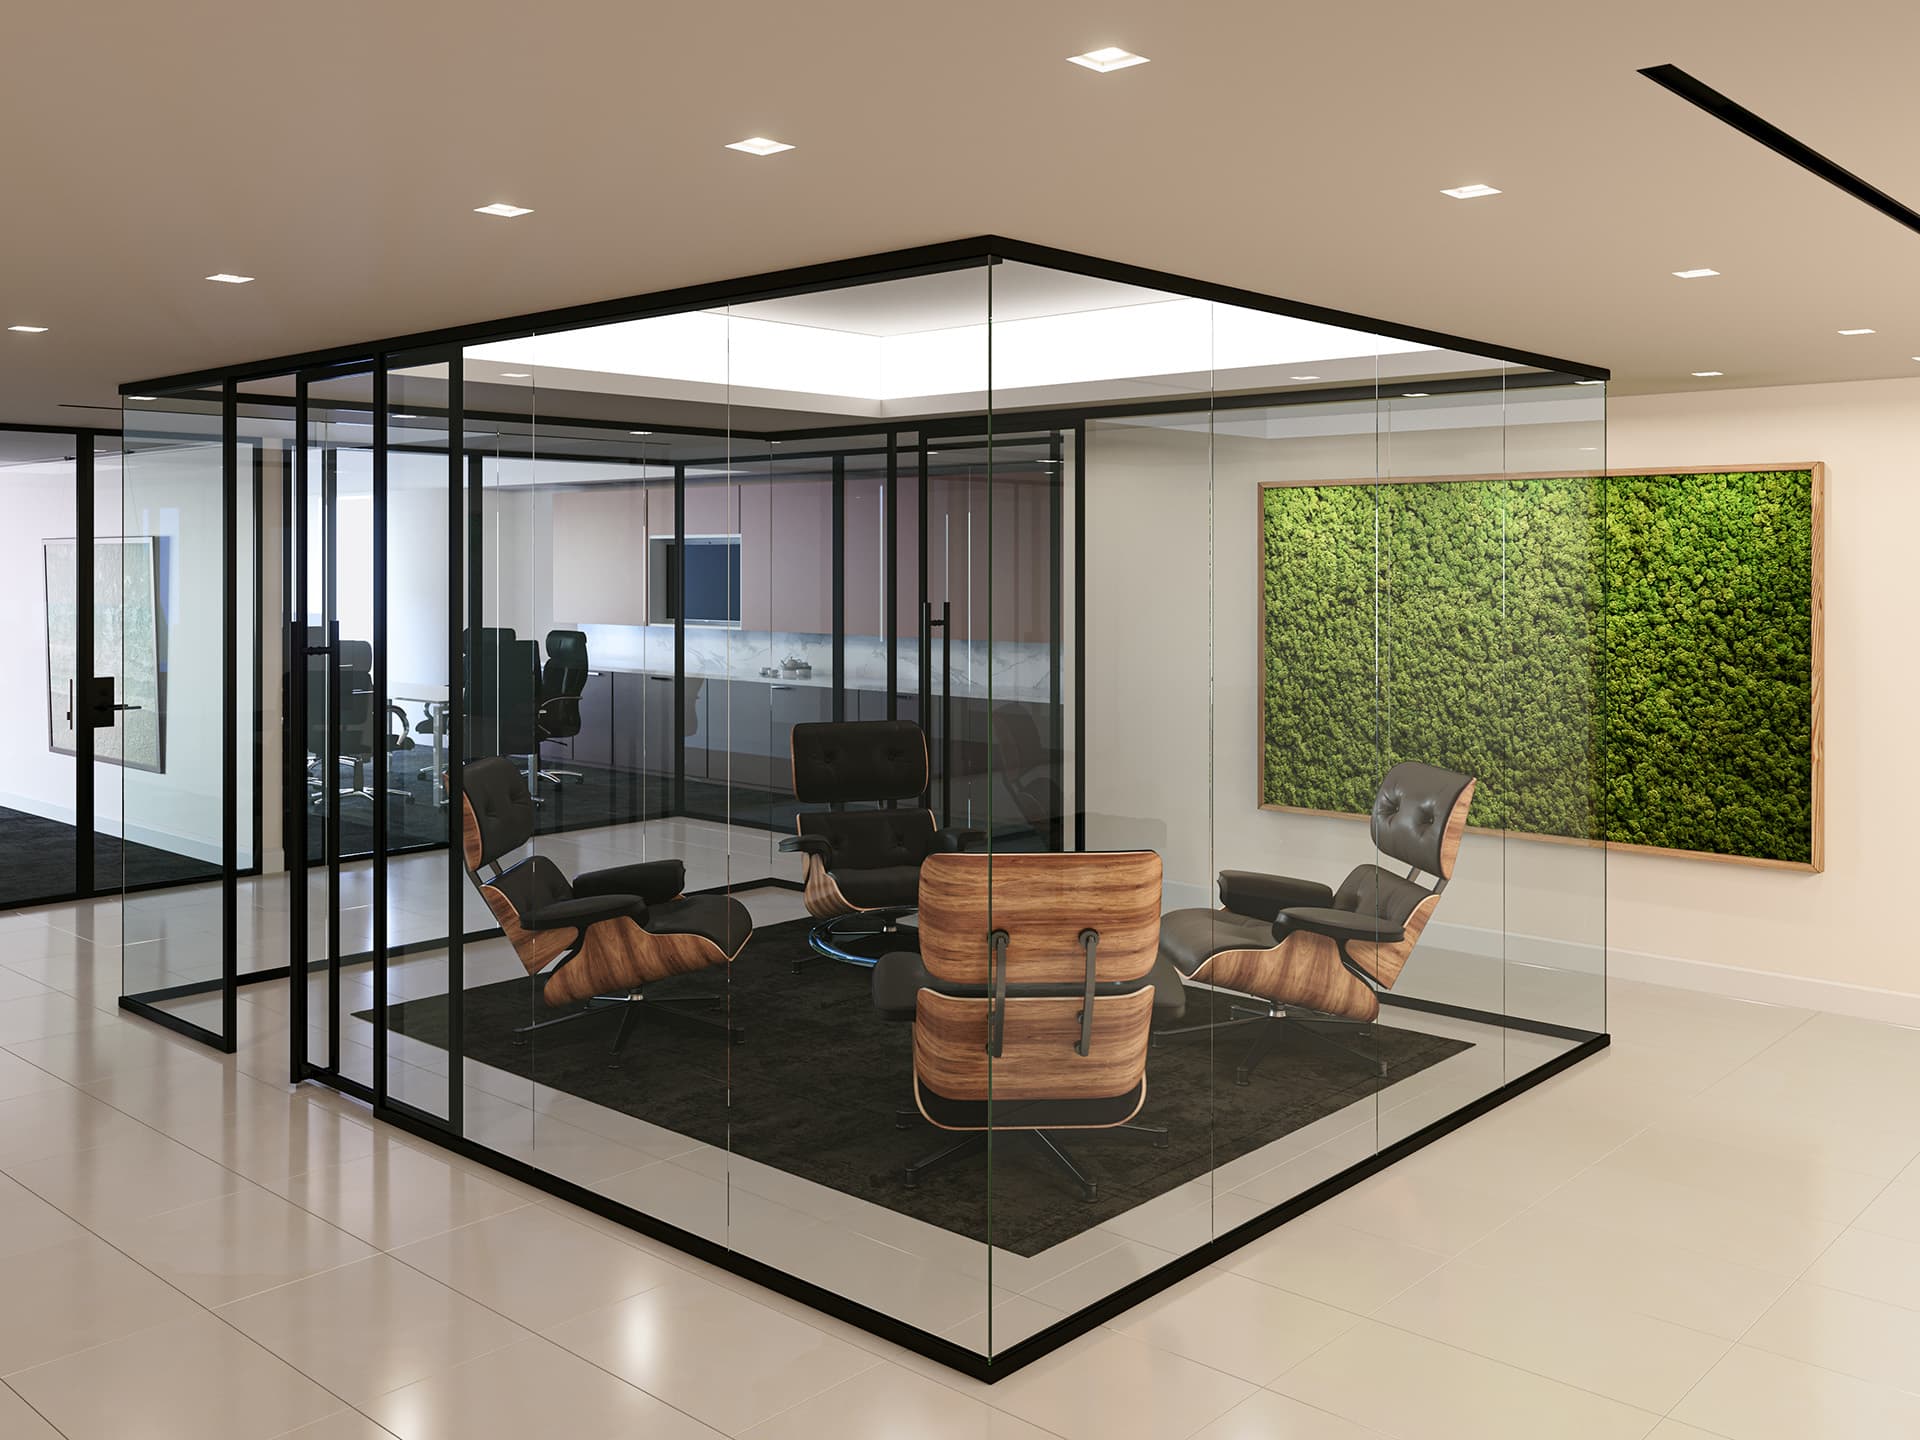 Meeting area created by glass walls inside an office building.